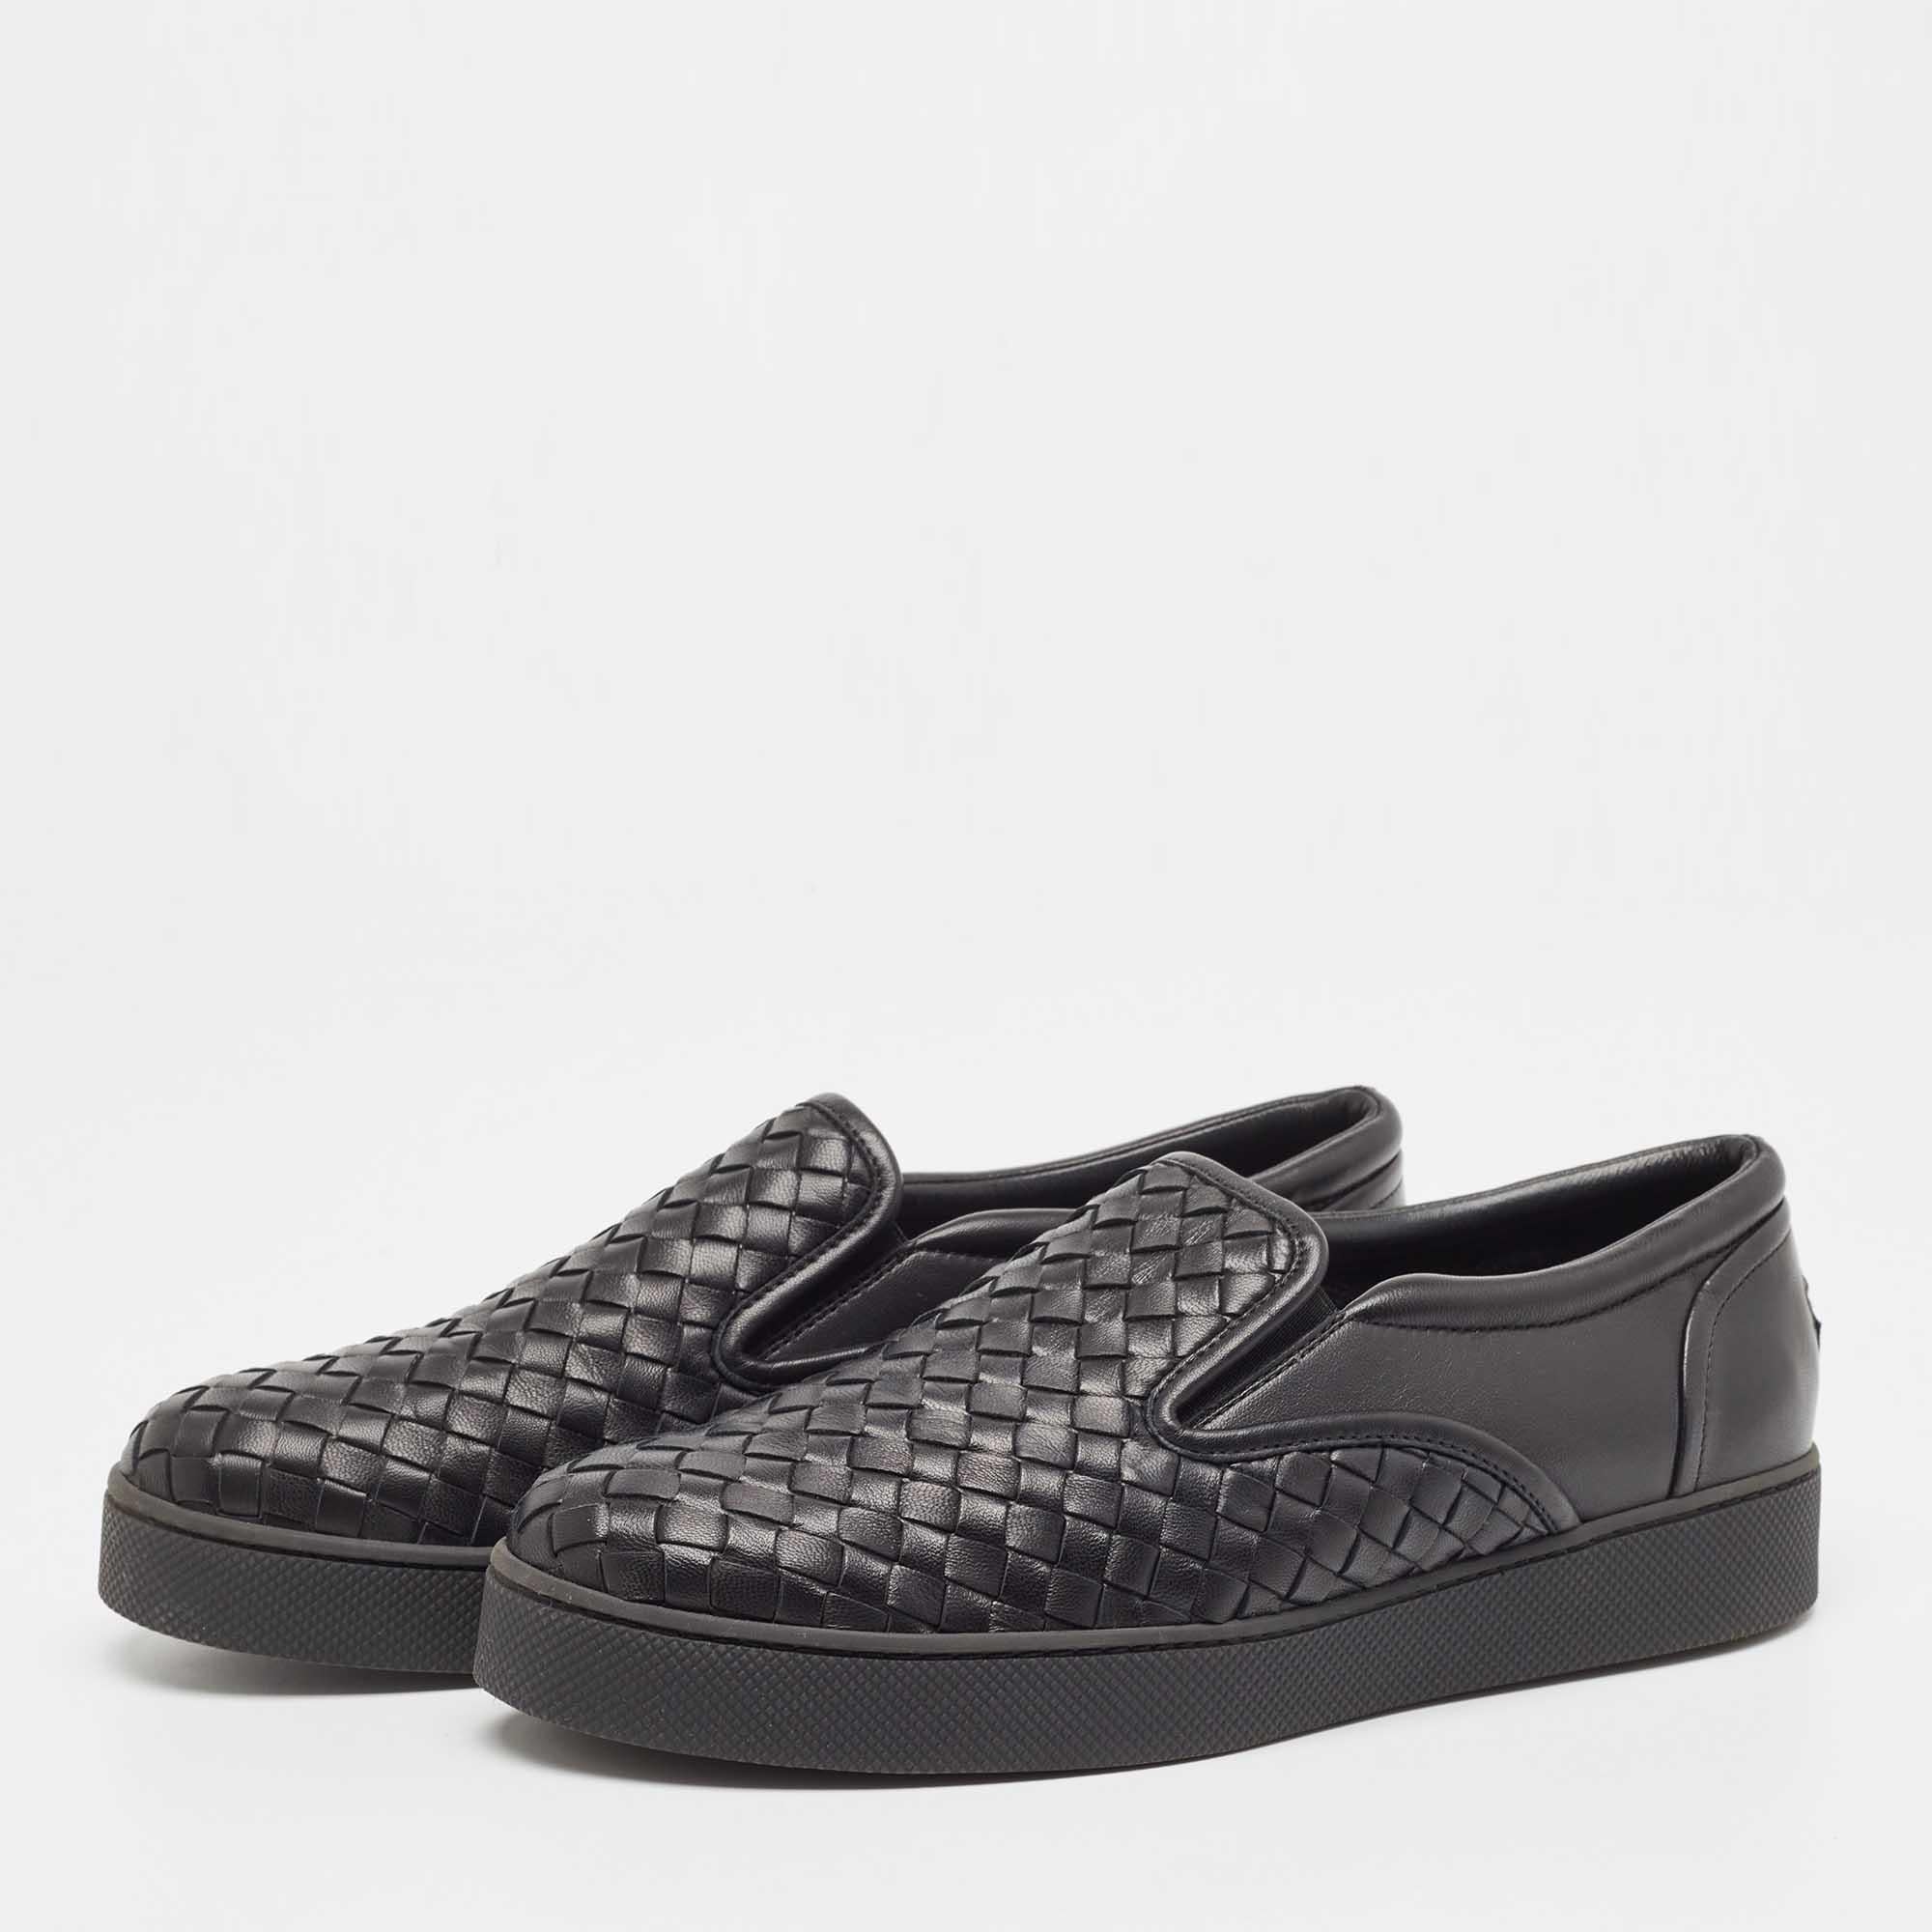 This chic pair of slip on sneakers is a Bottega Veneta creation. Made in Italy, these sneakers are crafted from leather and feature the signature Intrecciato pattern on the exterior. Team this sturdy pair with casual attire.

